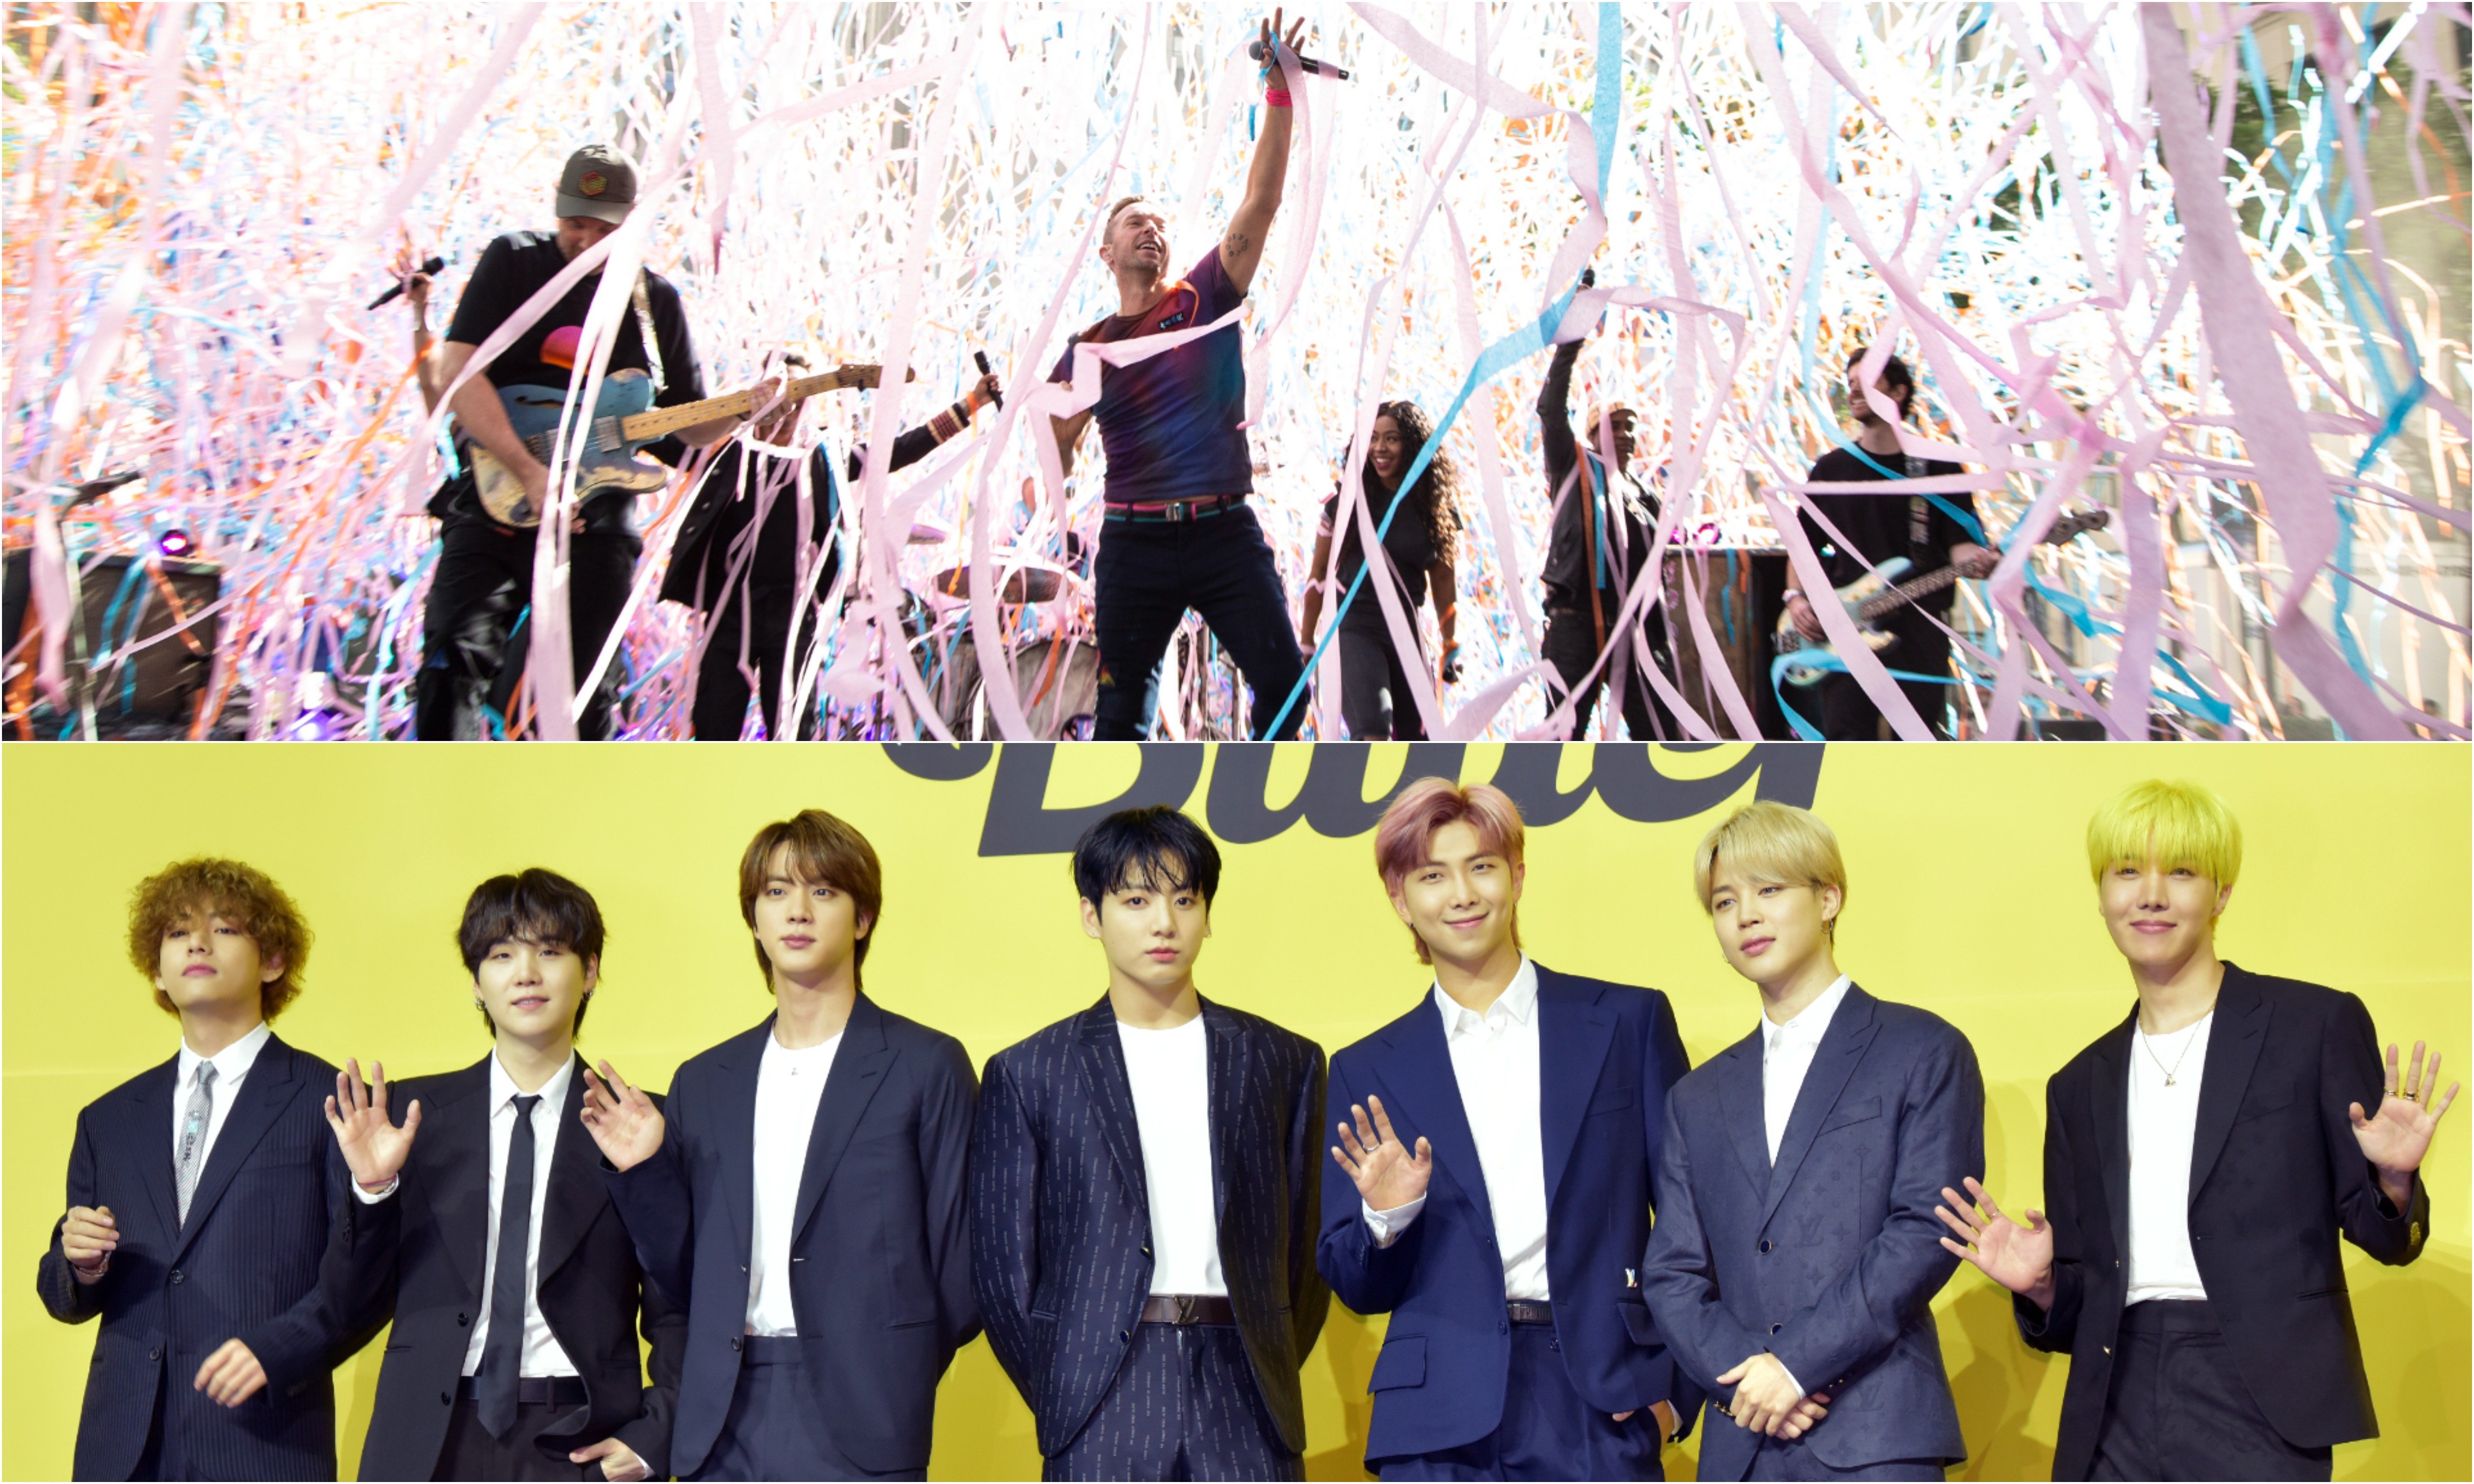 A joined photo of Coldplay performing and the members of BTS